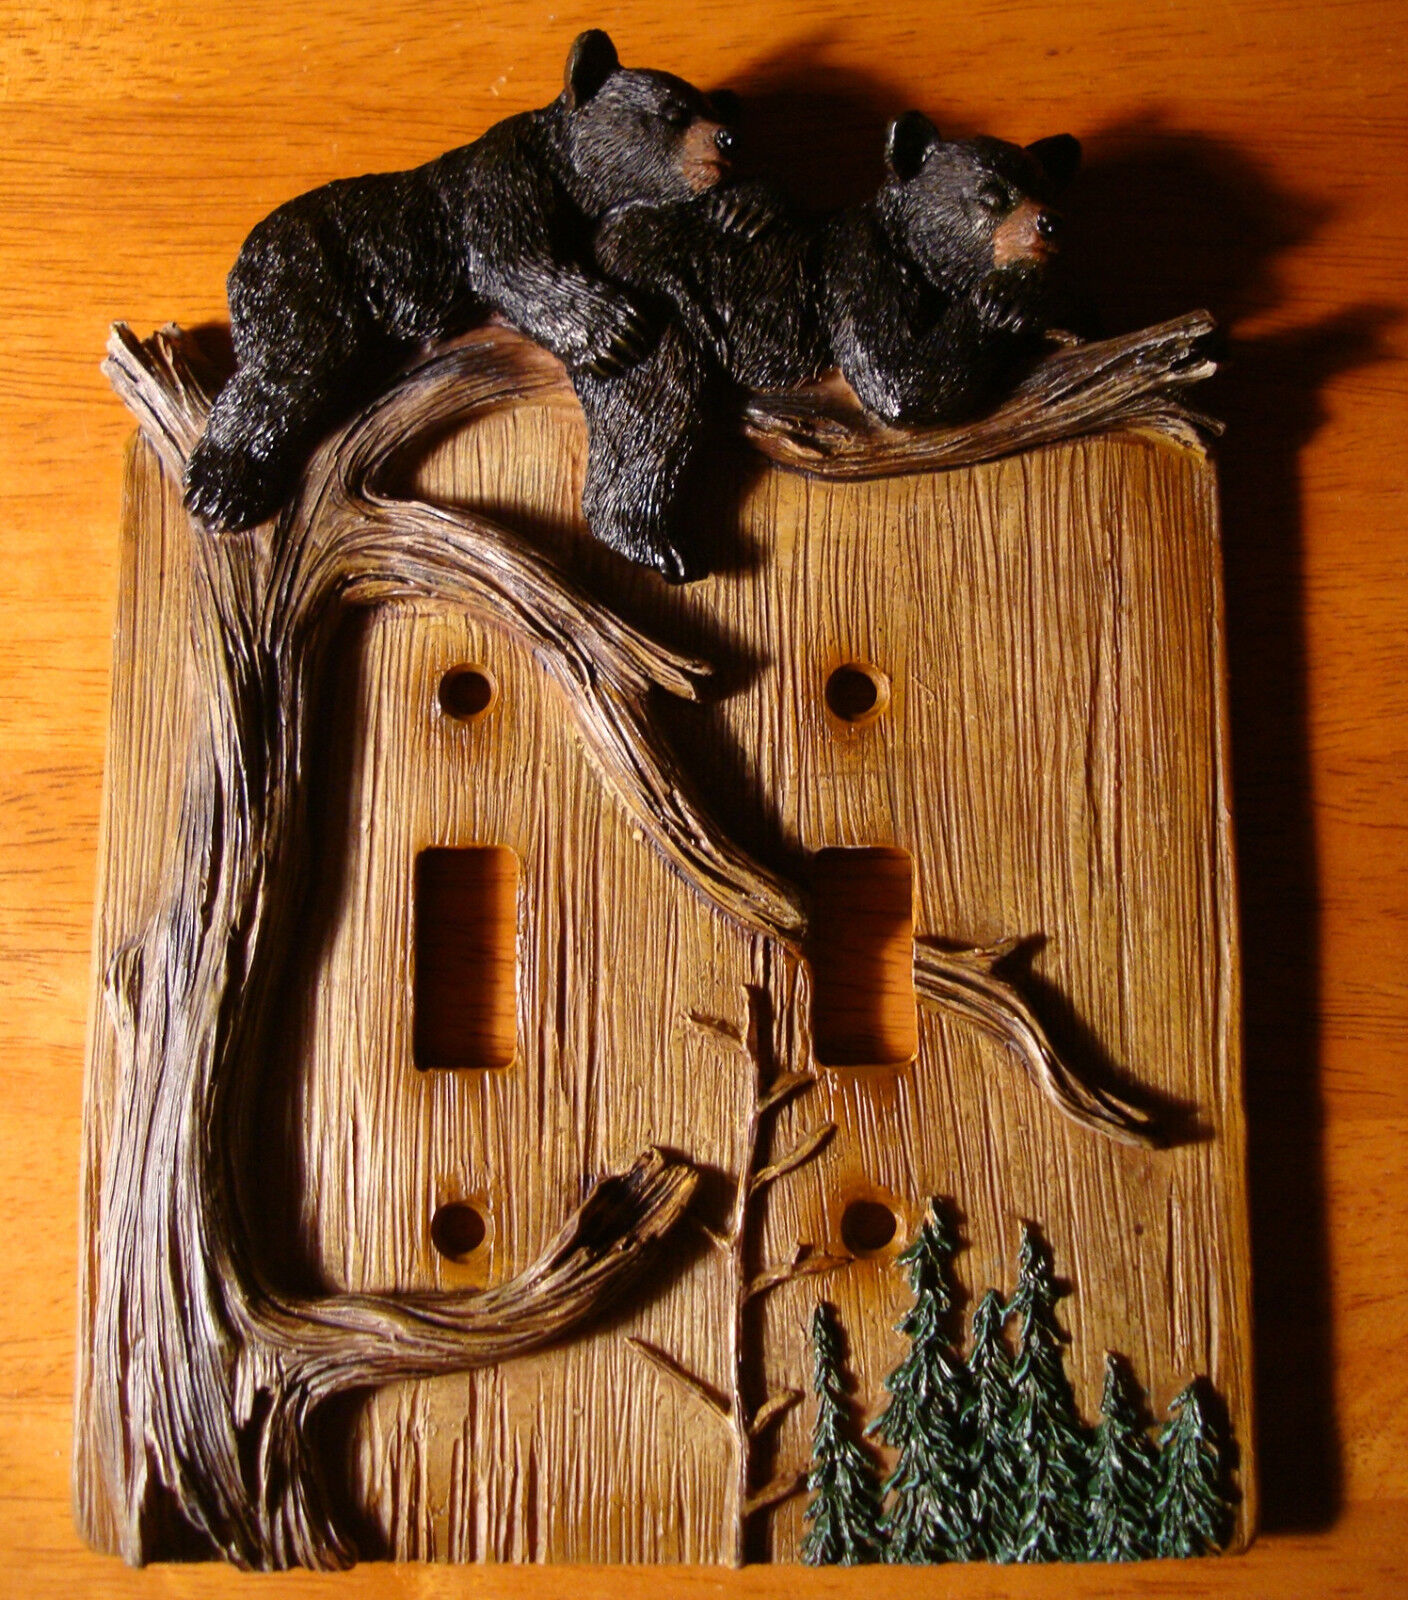 BLACK BEAR CUB DOUBLE TOGGLE LIGHT SWITCH WALL PLATE COVER Cabin Lodge Decor NEW